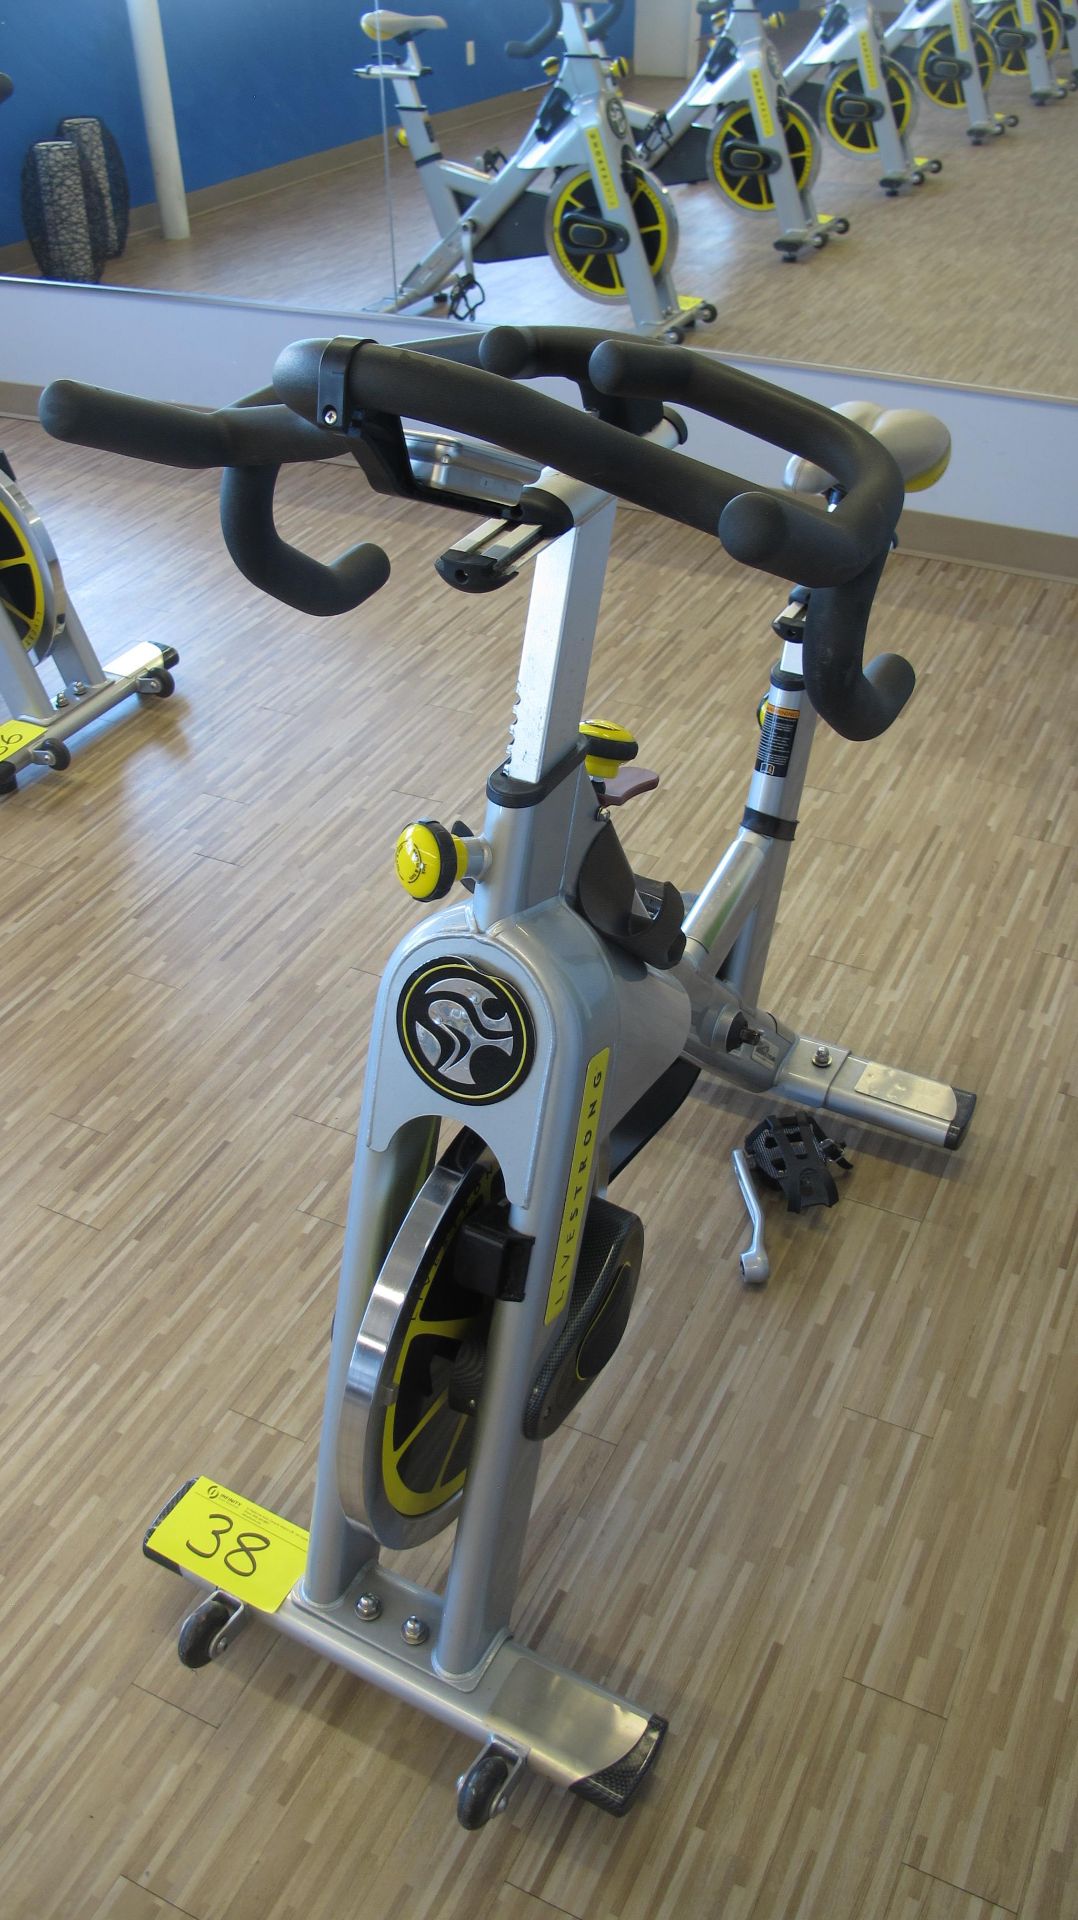 LIVESTRONG LS S-Series Class S Stationary Spin Bike, 'AS-IS', S/N: LASB0008034-111 - Image 4 of 10